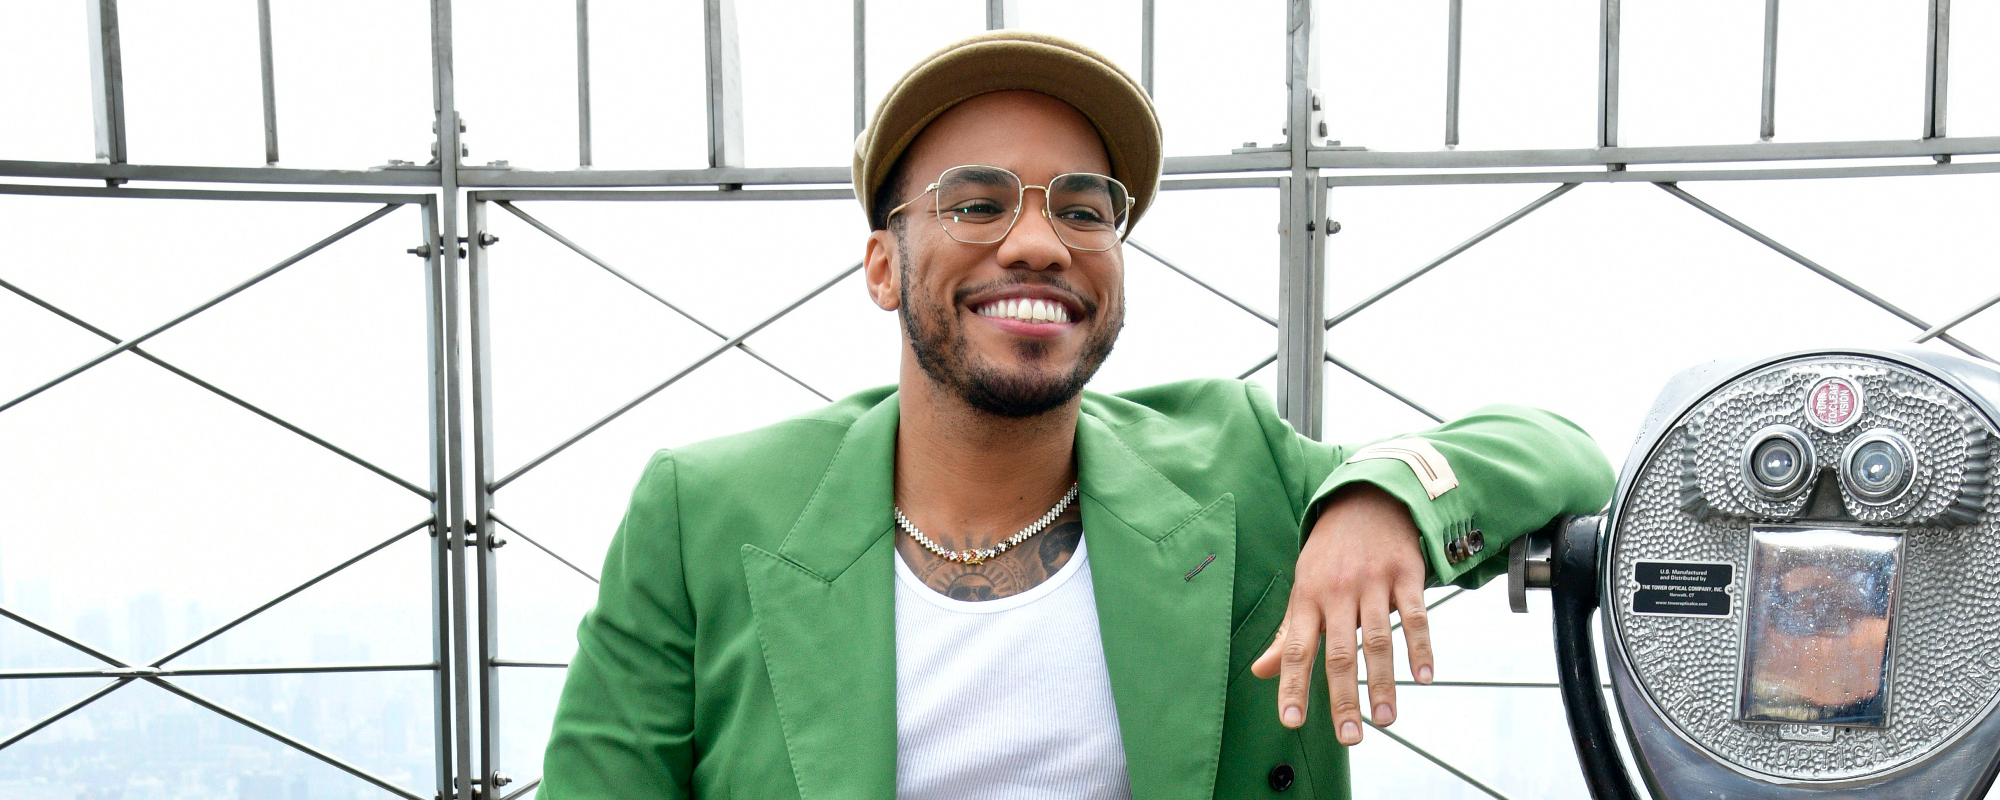 First Look at Anderson .Paak’s alter ego, Anderswim .Shaark, on Nickelodeon’s ‘Baby Shark’s Big Show’